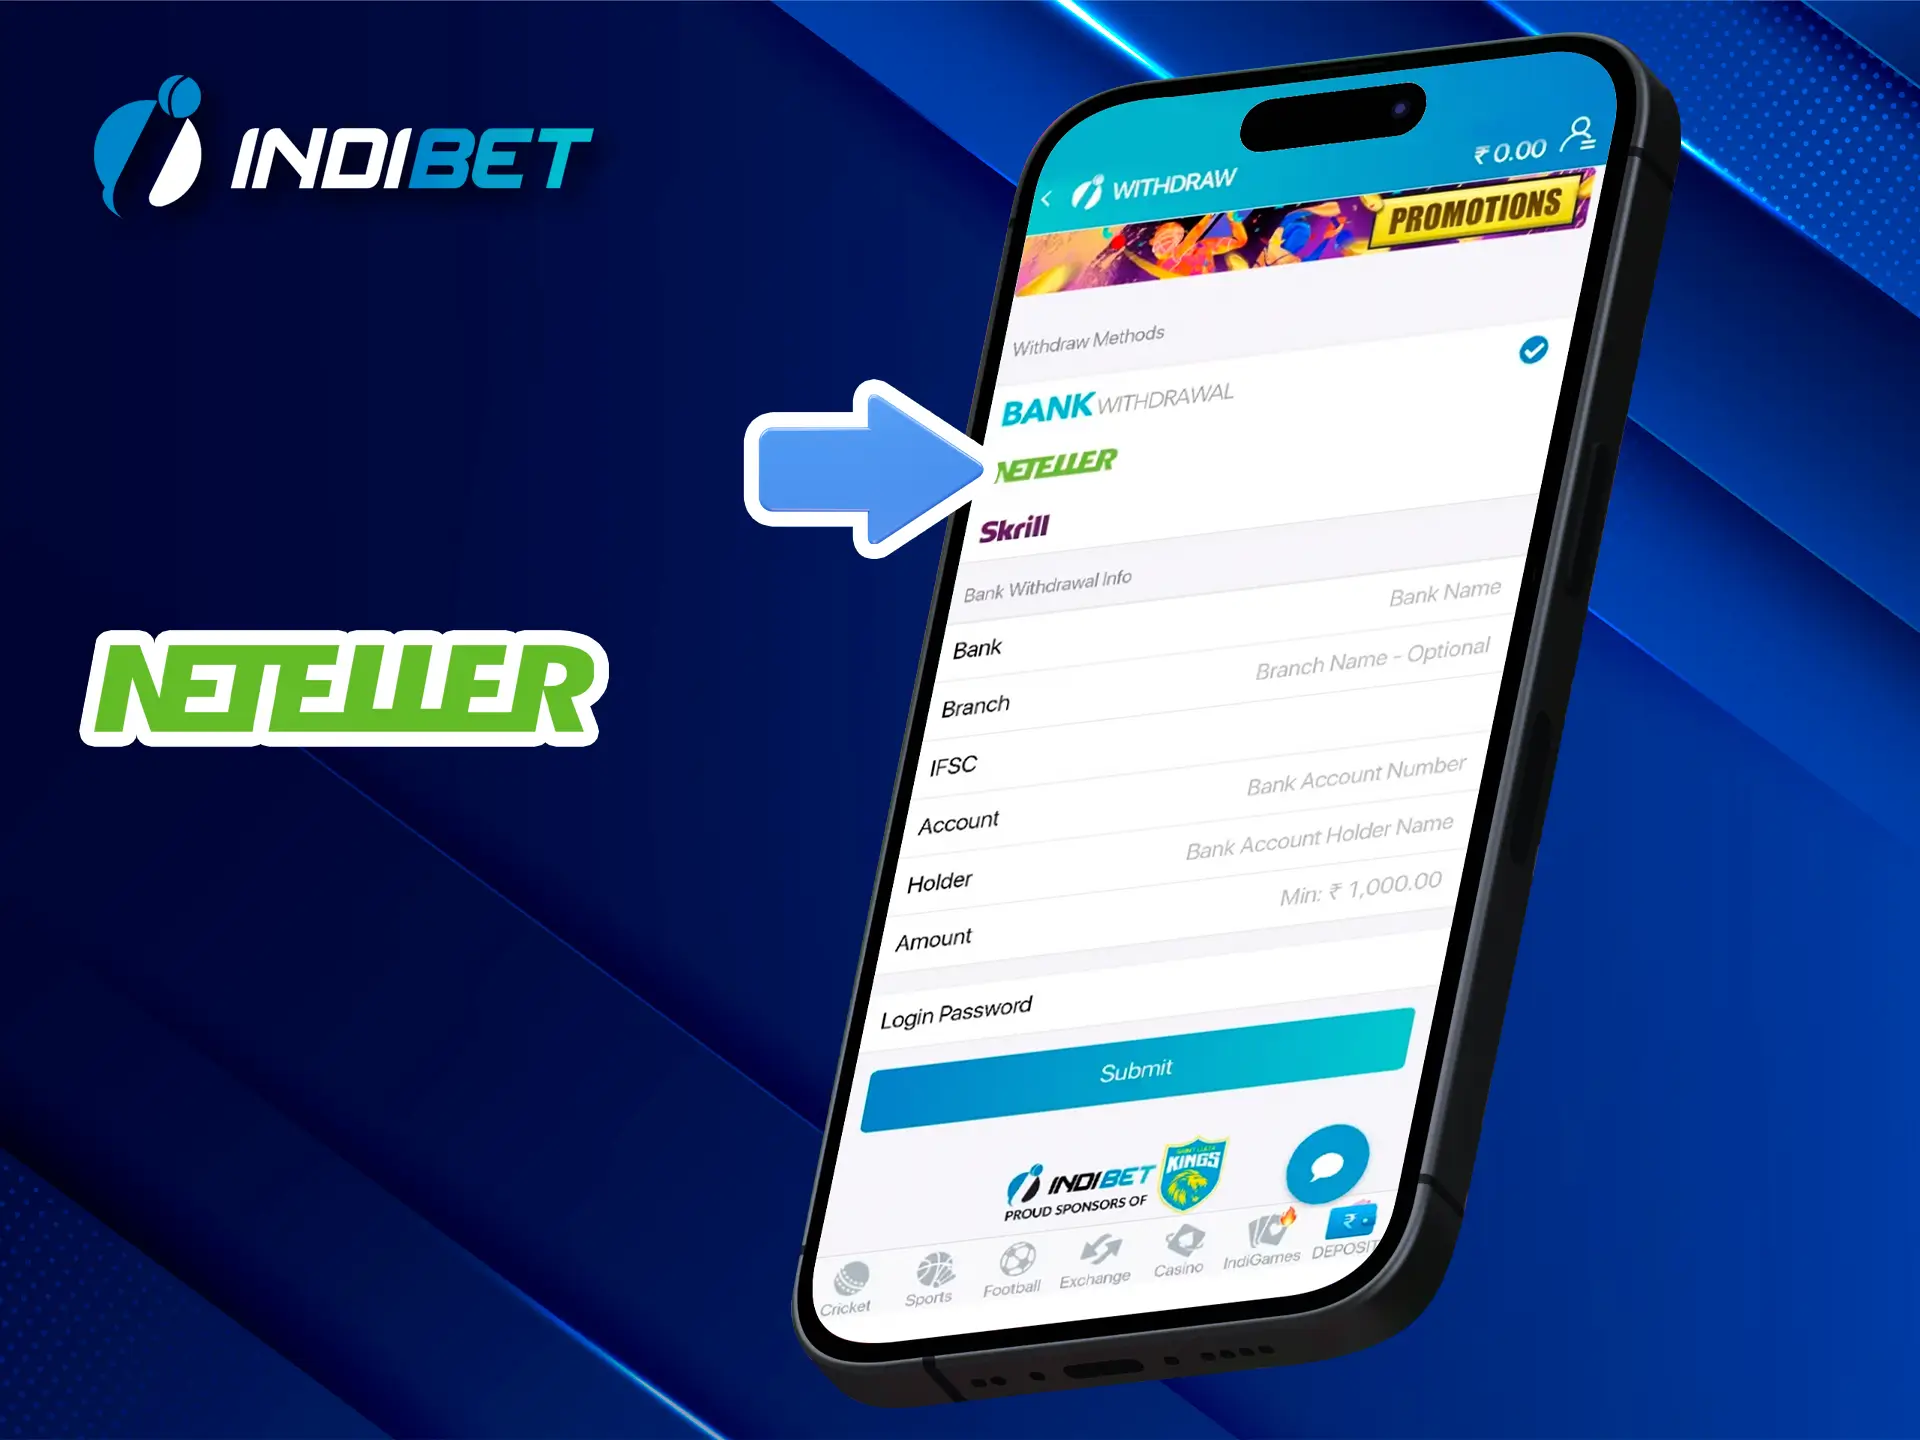 Use Neteller to deposit and withdraw funds from the famous Indibet betting site.